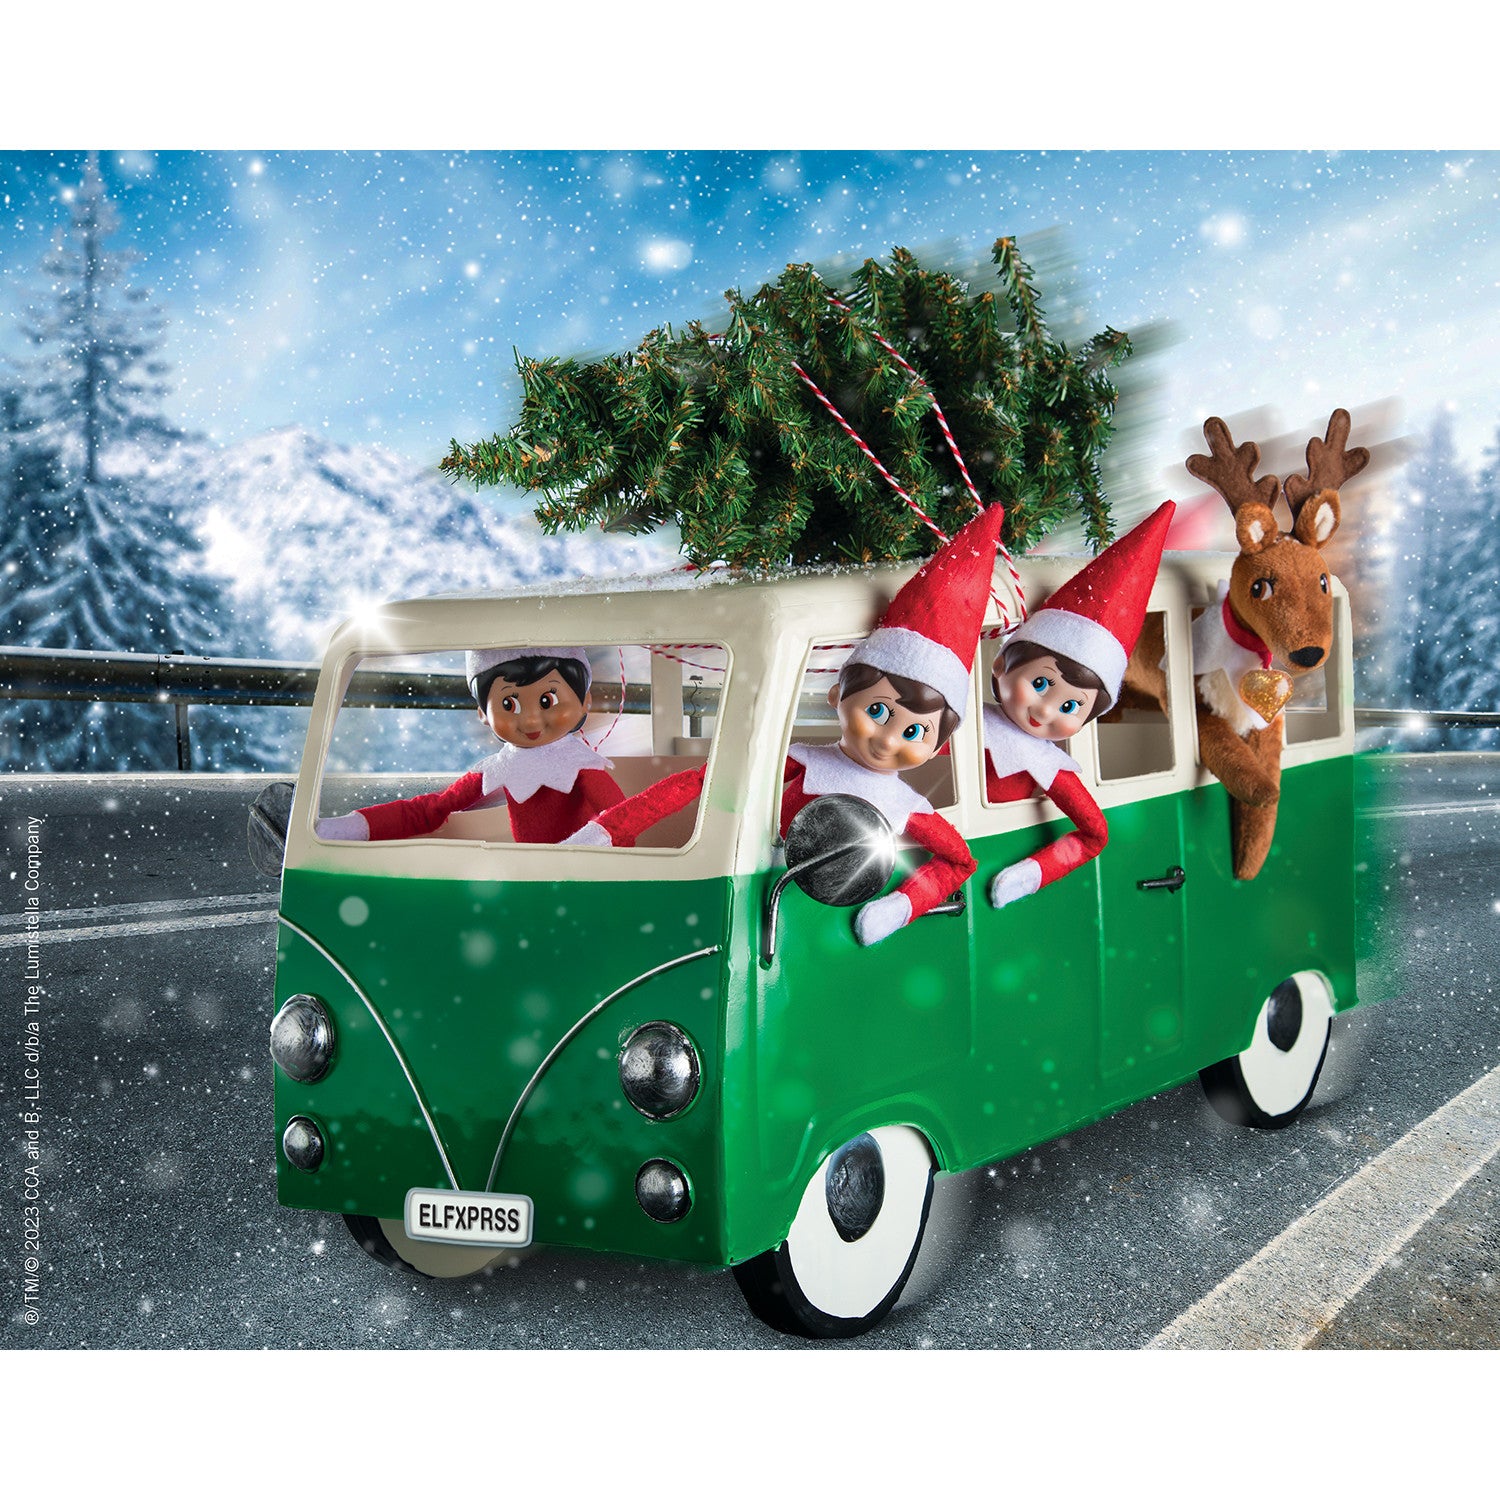 Elf on the Shelf 4-Pack 100 Piece Jigsaw Puzzles - V2